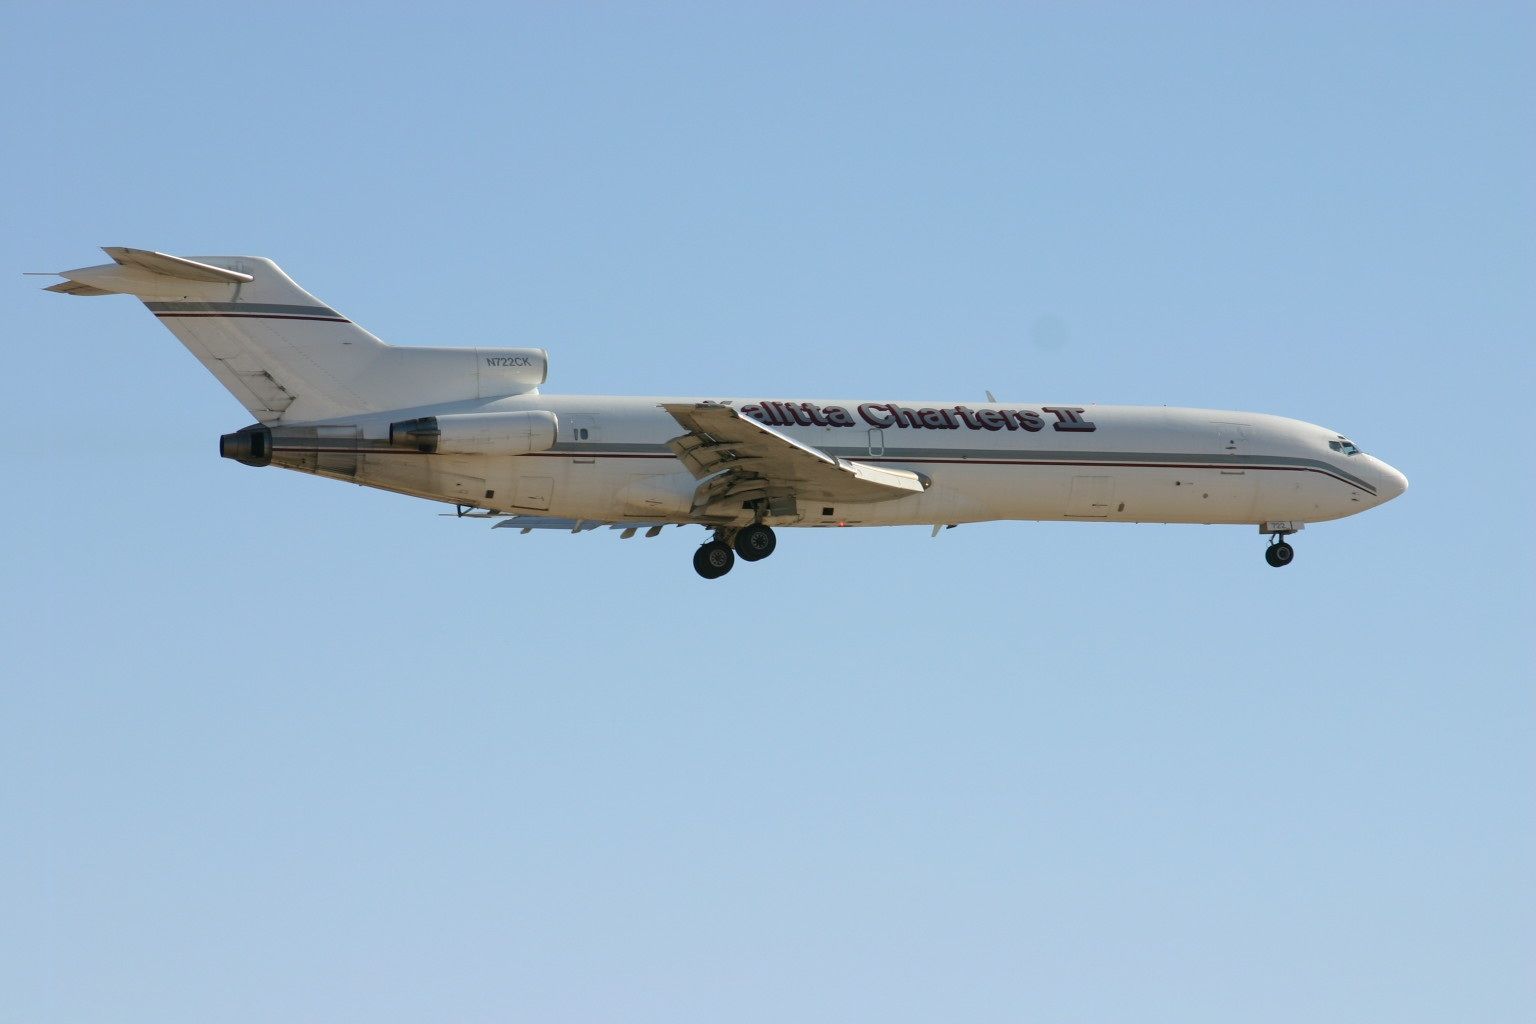 A Kalitta Boeing 727F flying in the sky.